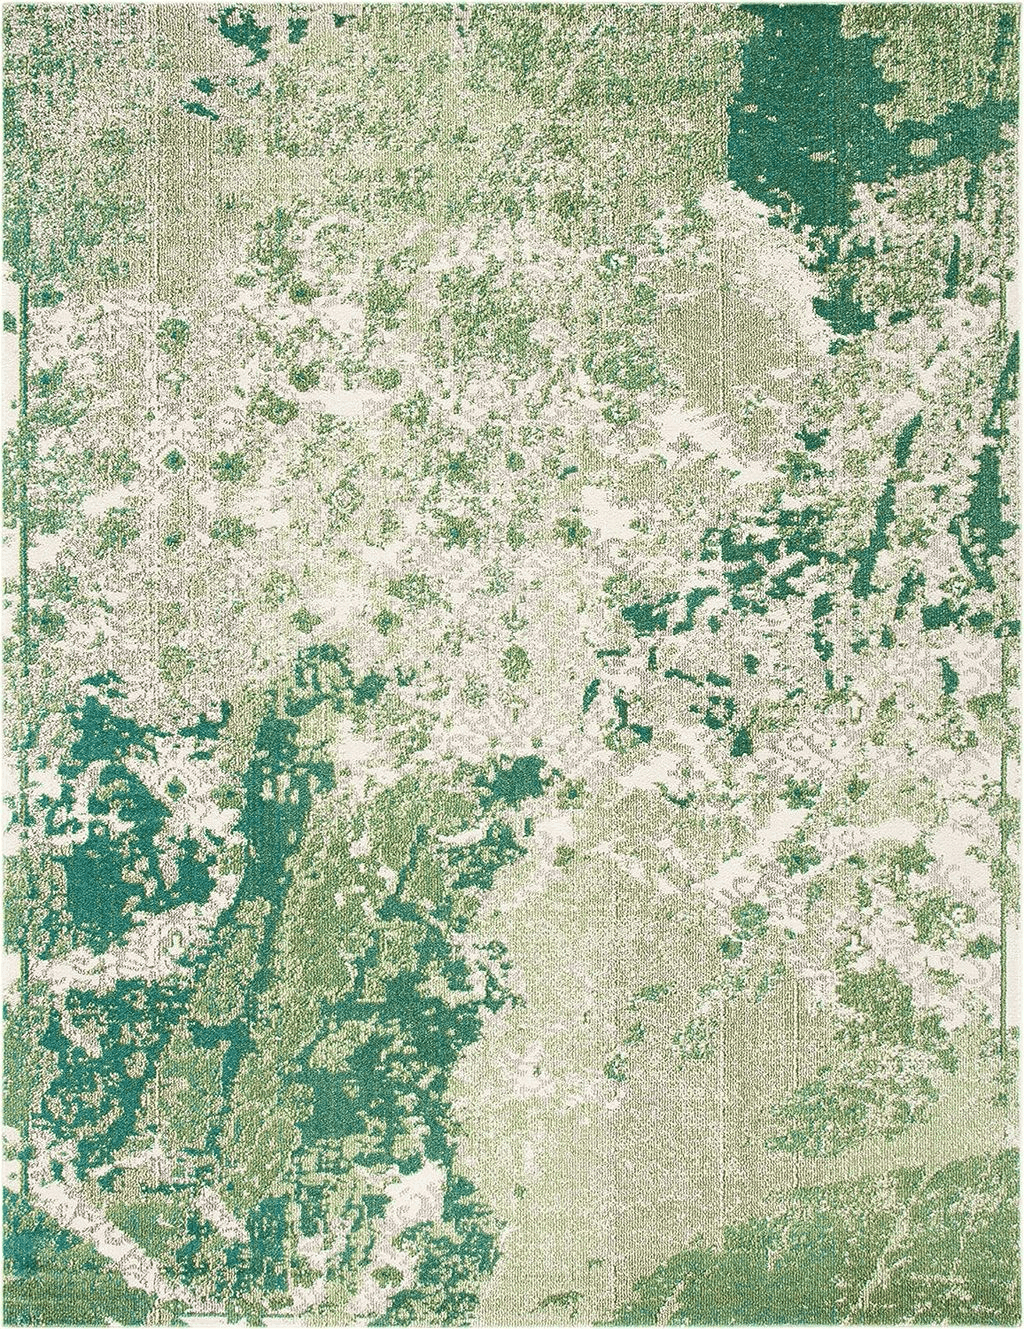 SAFAVIEH Madison Collection Area Rug - 8' x 10', Green & Ivory, Modern Abstract Design, Non-Shedding & Easy Care, Ideal for High Traffic Areas in Living Room, Bedroom (MAD499Y)